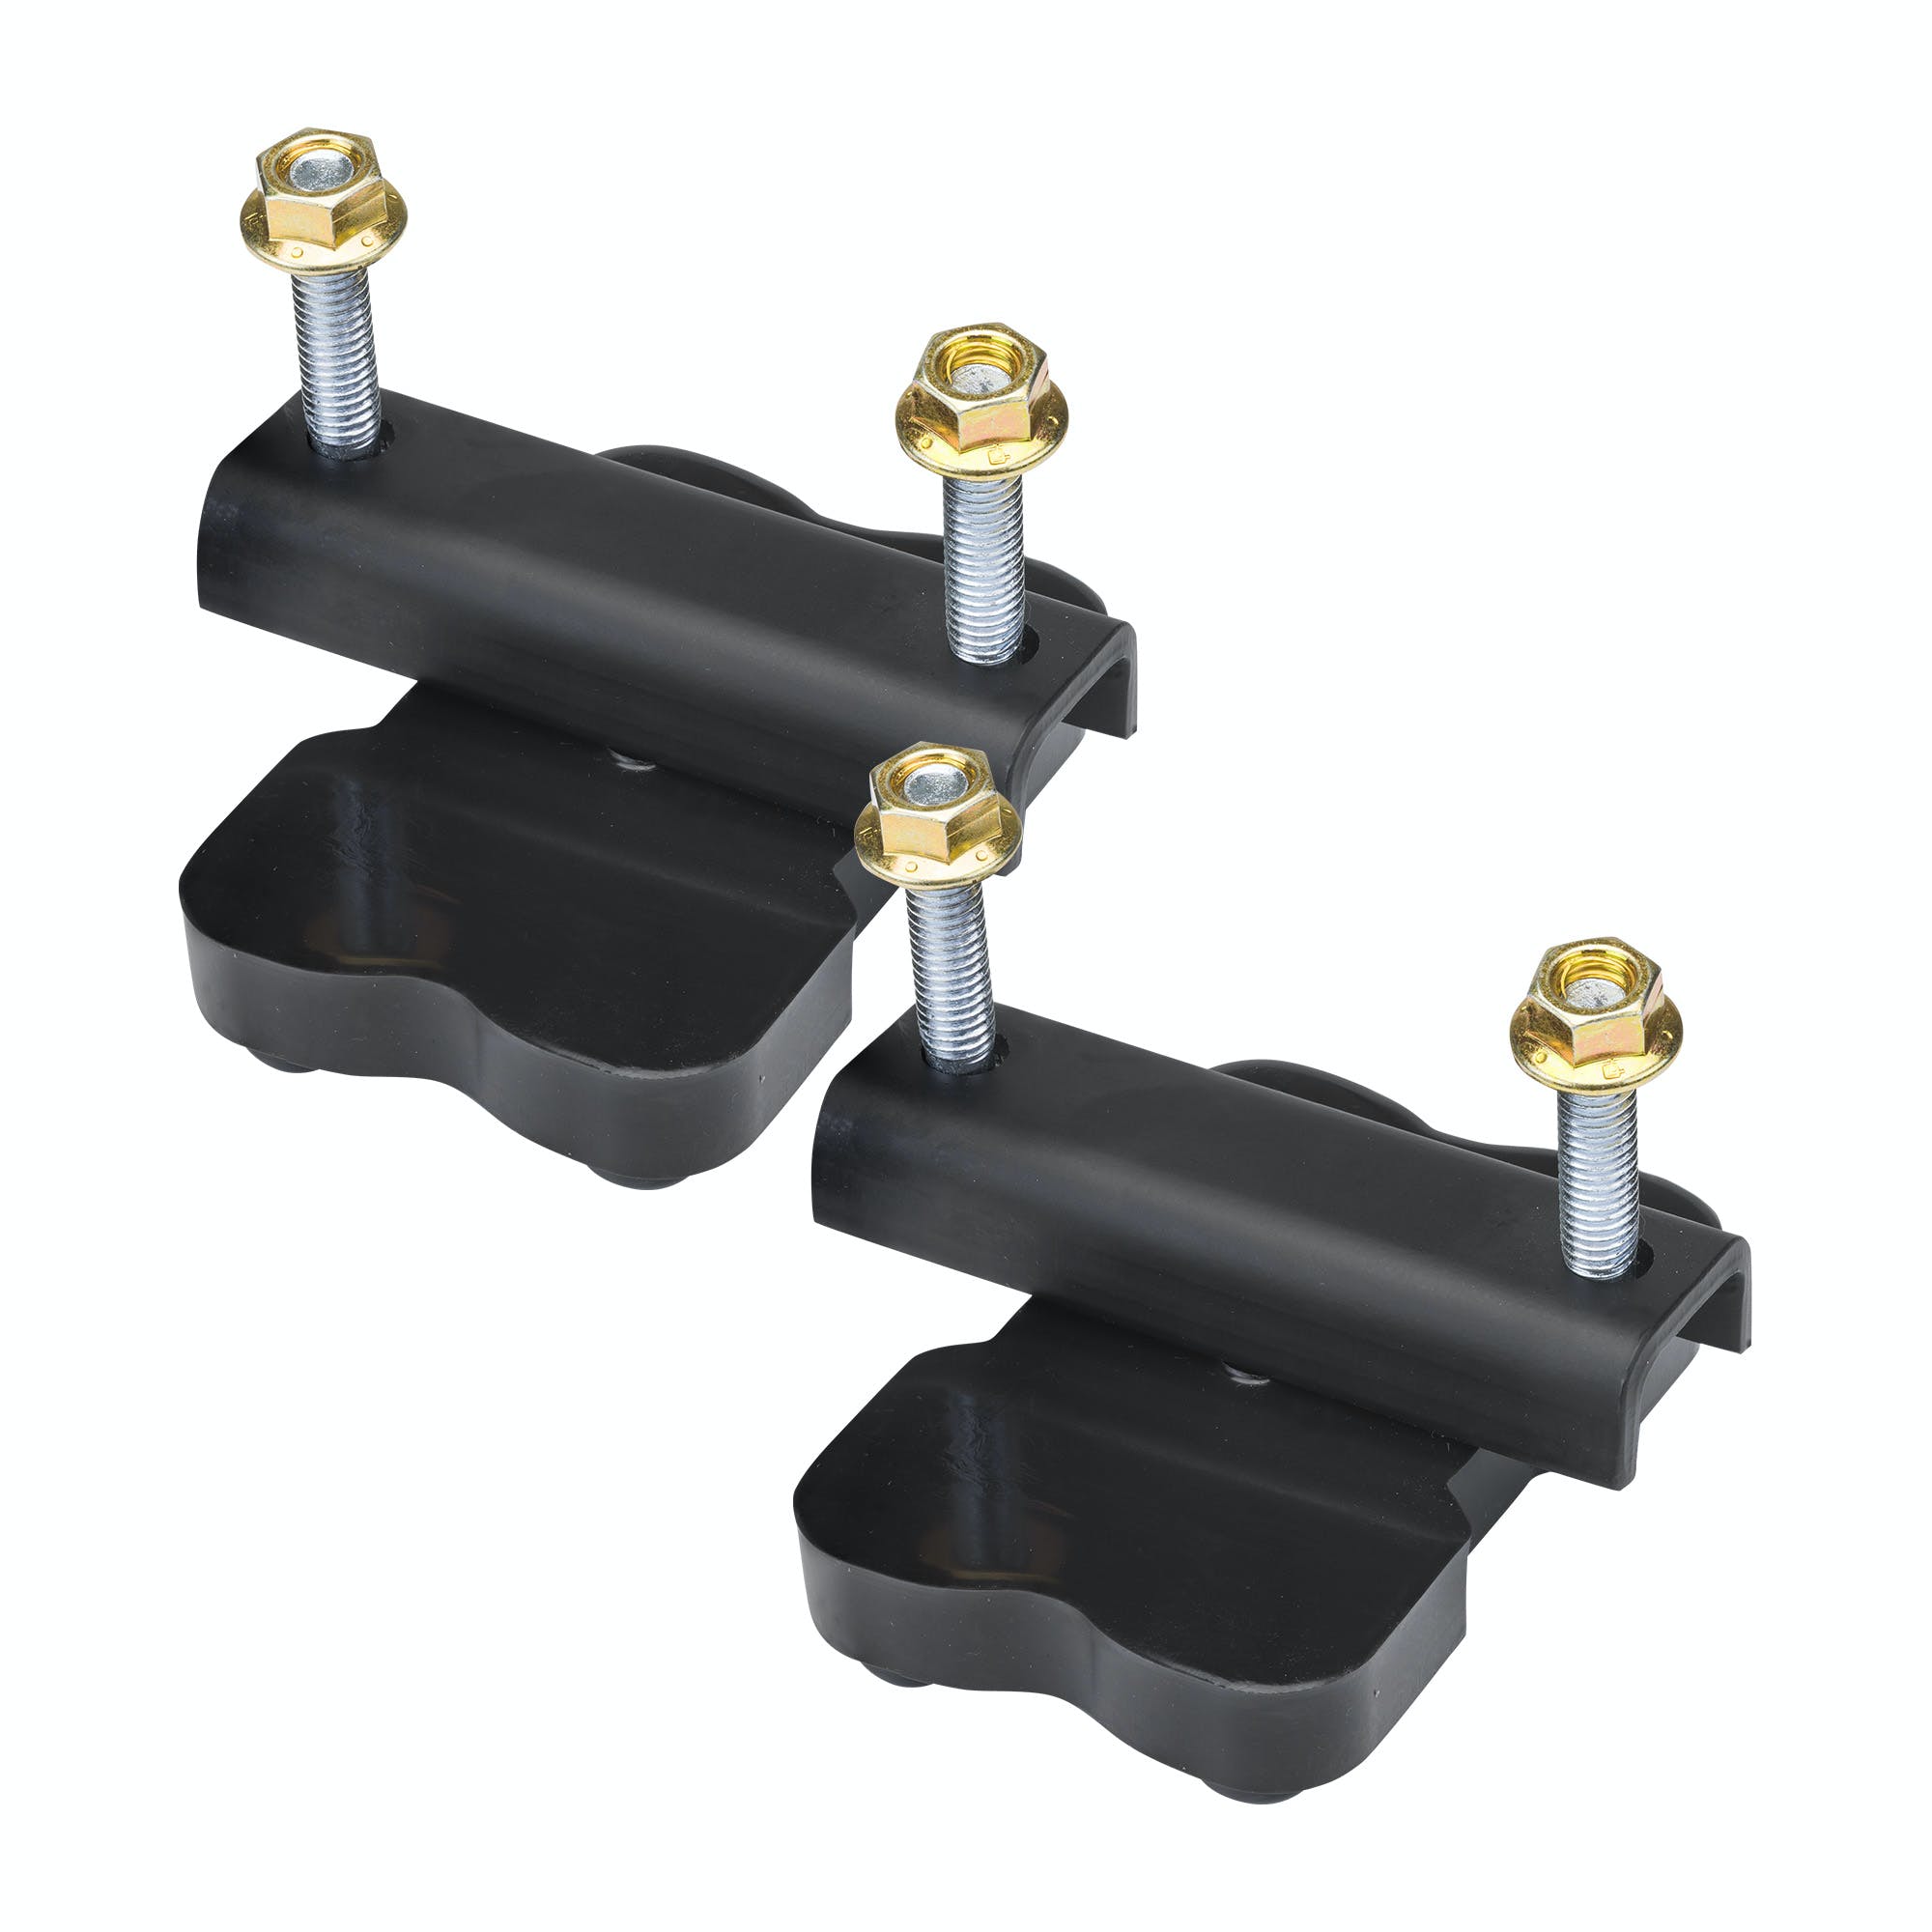 SuperSprings P6KT Mounting Kit used for specified SuperSprings applications